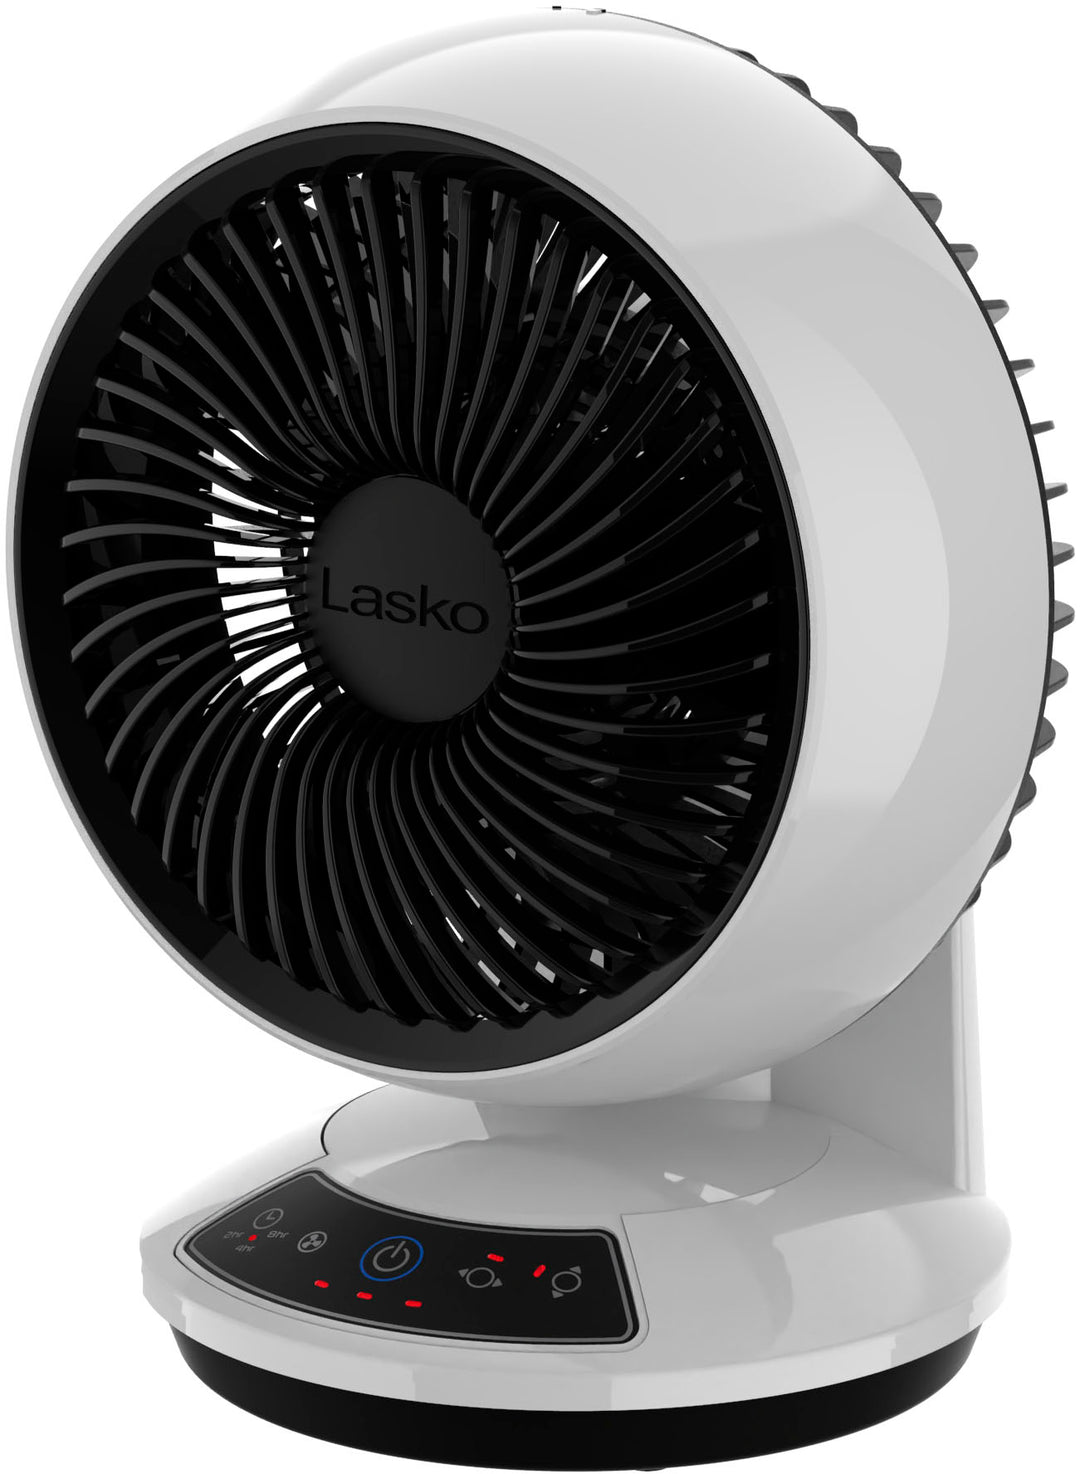 Lasko Whirlwind Orbital Motion Air Circulator Fan with Timer and Remote Control - White_4